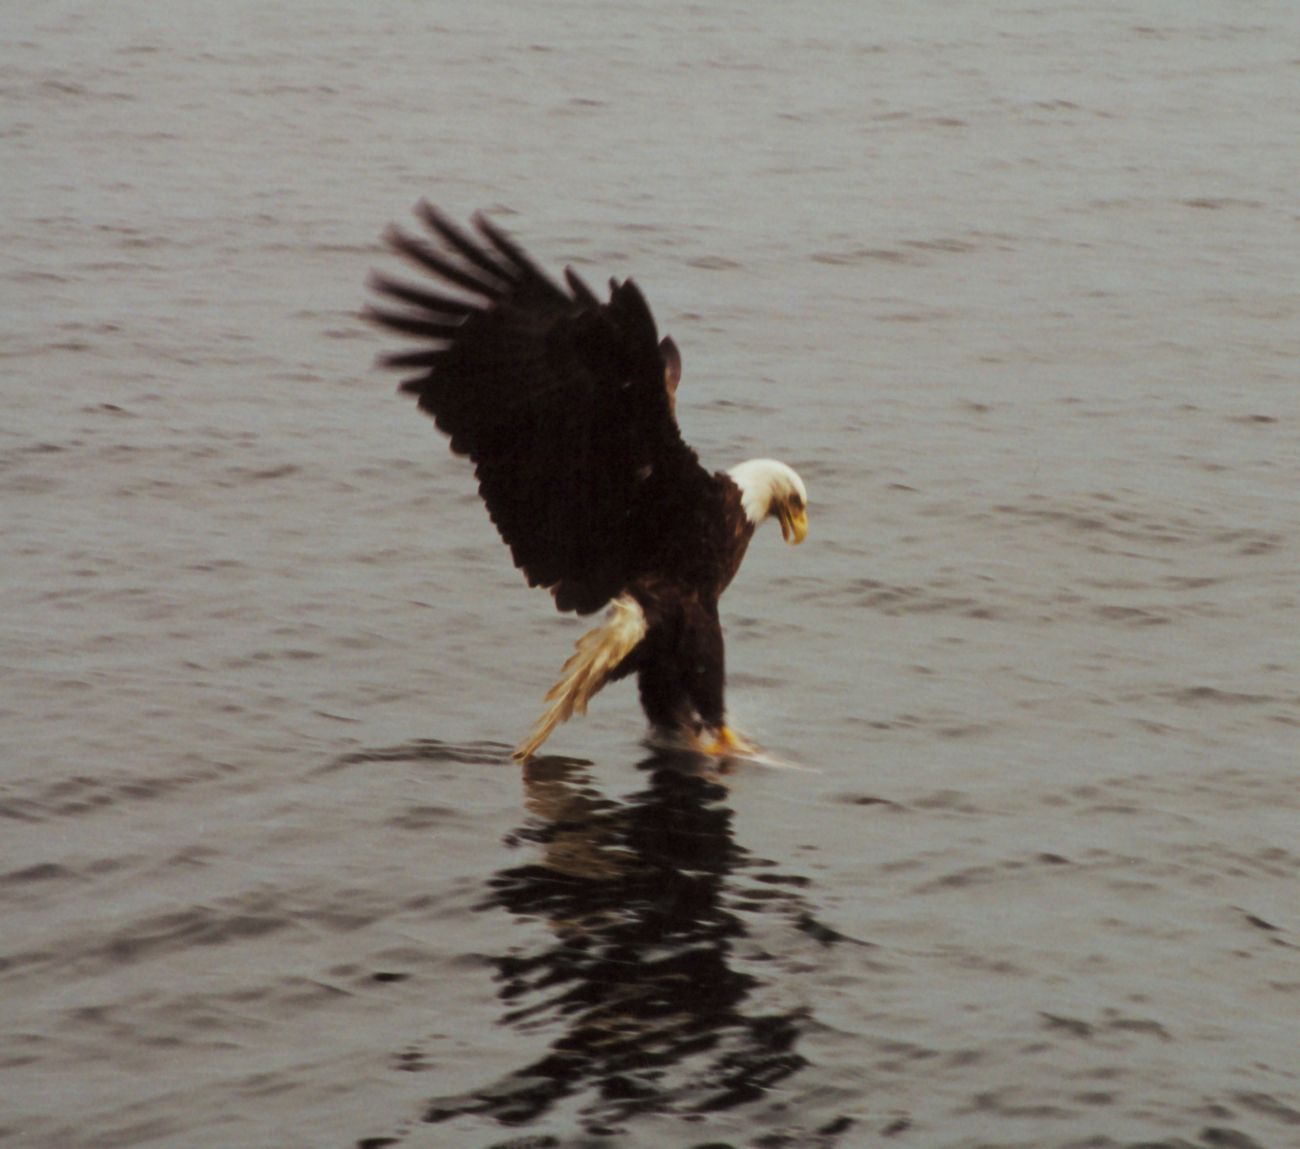 Bald eagle catching dinner